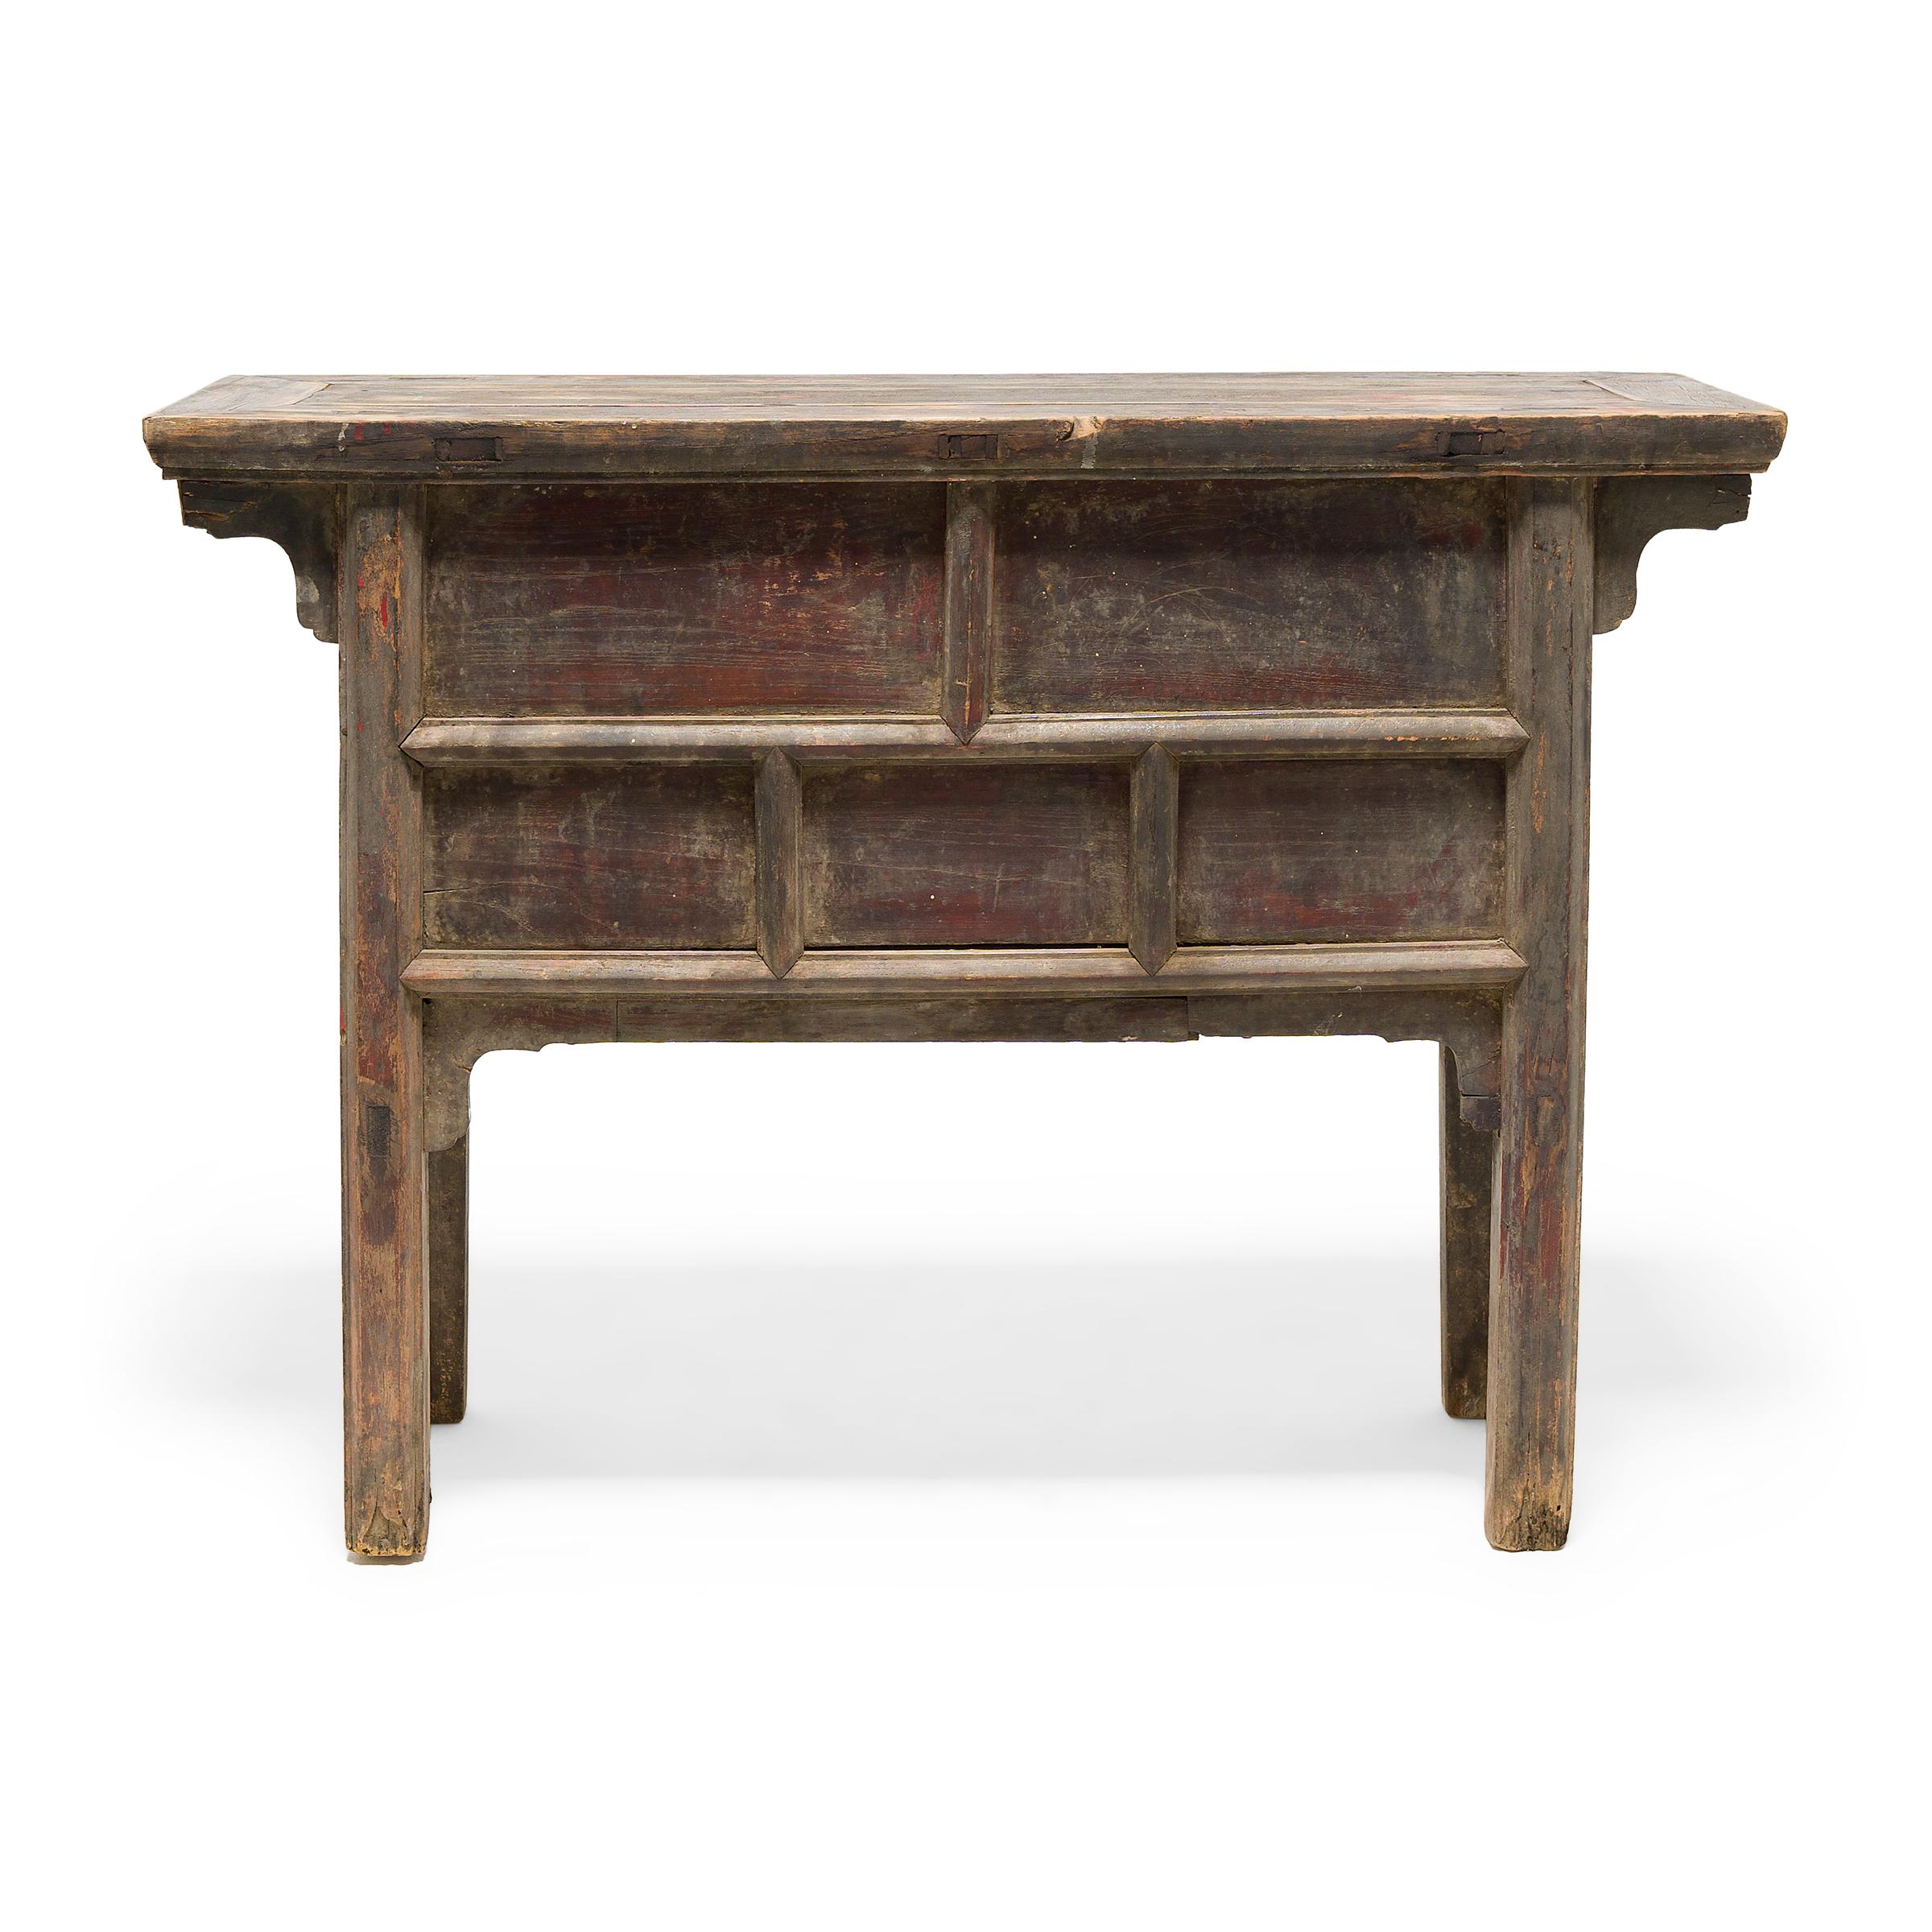 Rustic Chinese Two Drawer Offering Table, c. 1800